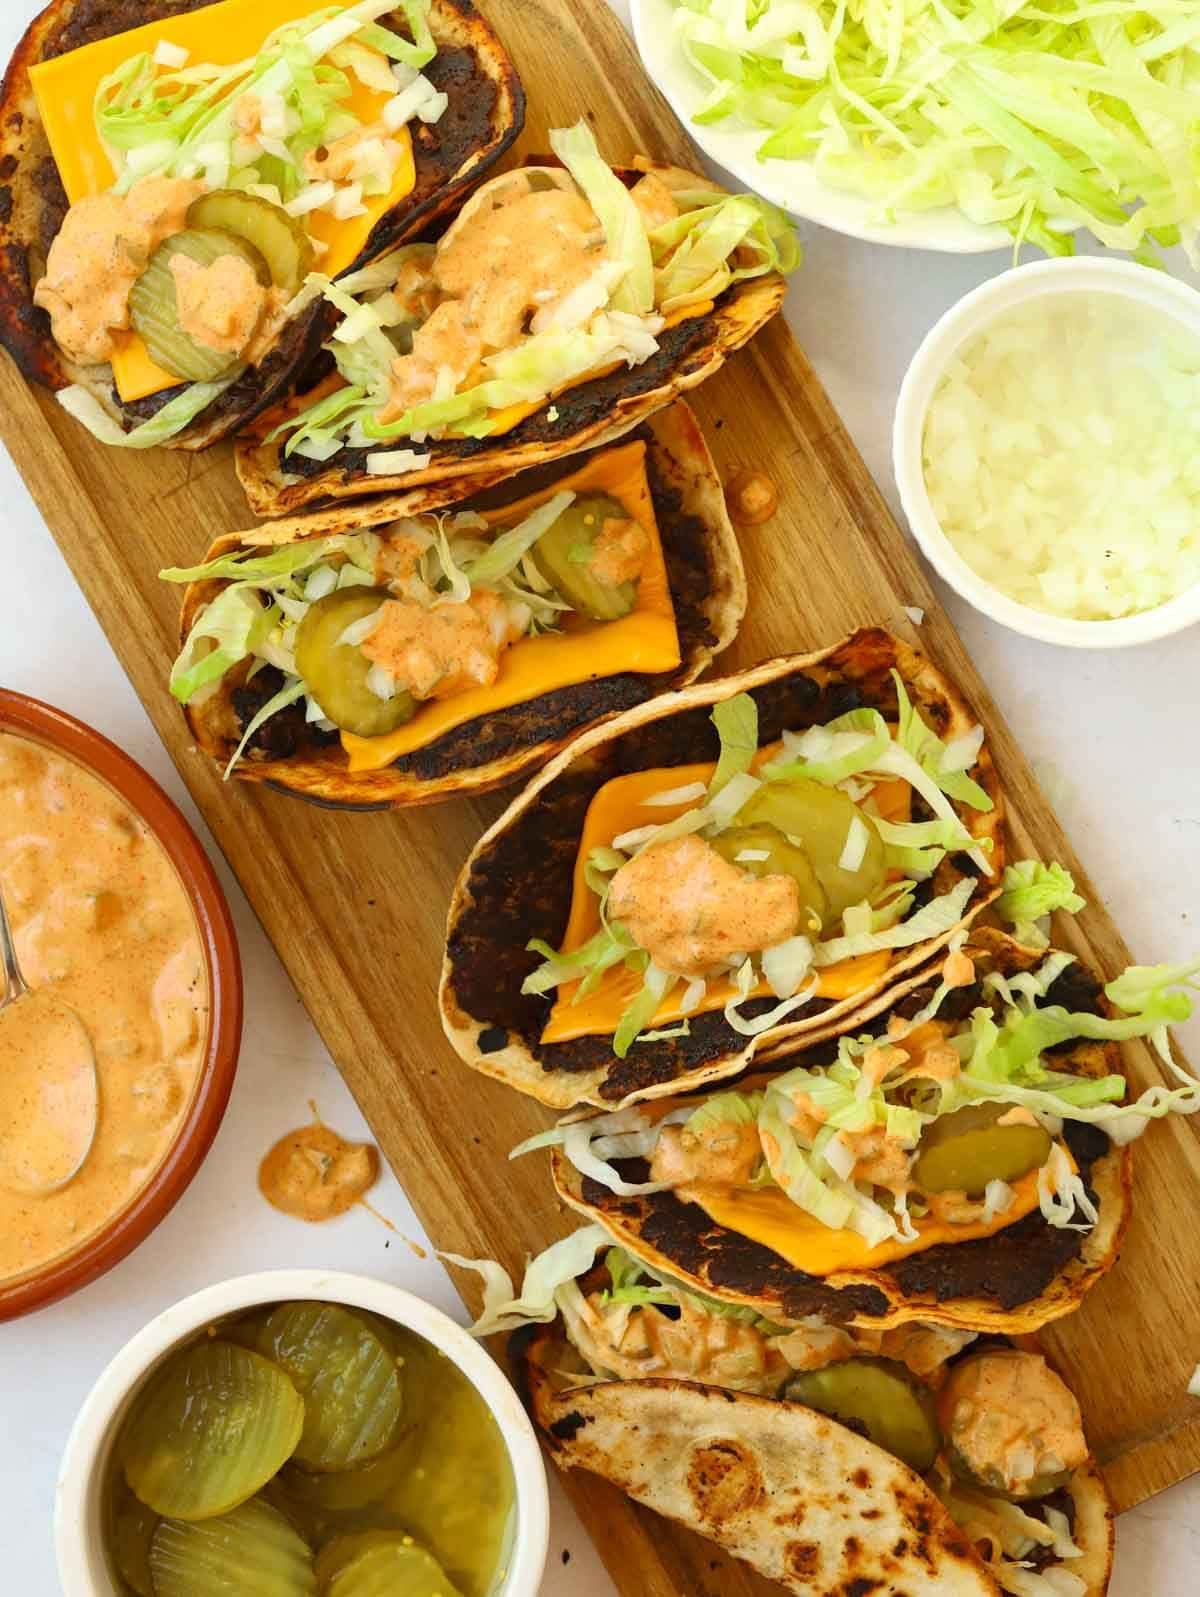 A serving board filled with Big Maco Tacos and side dishes.